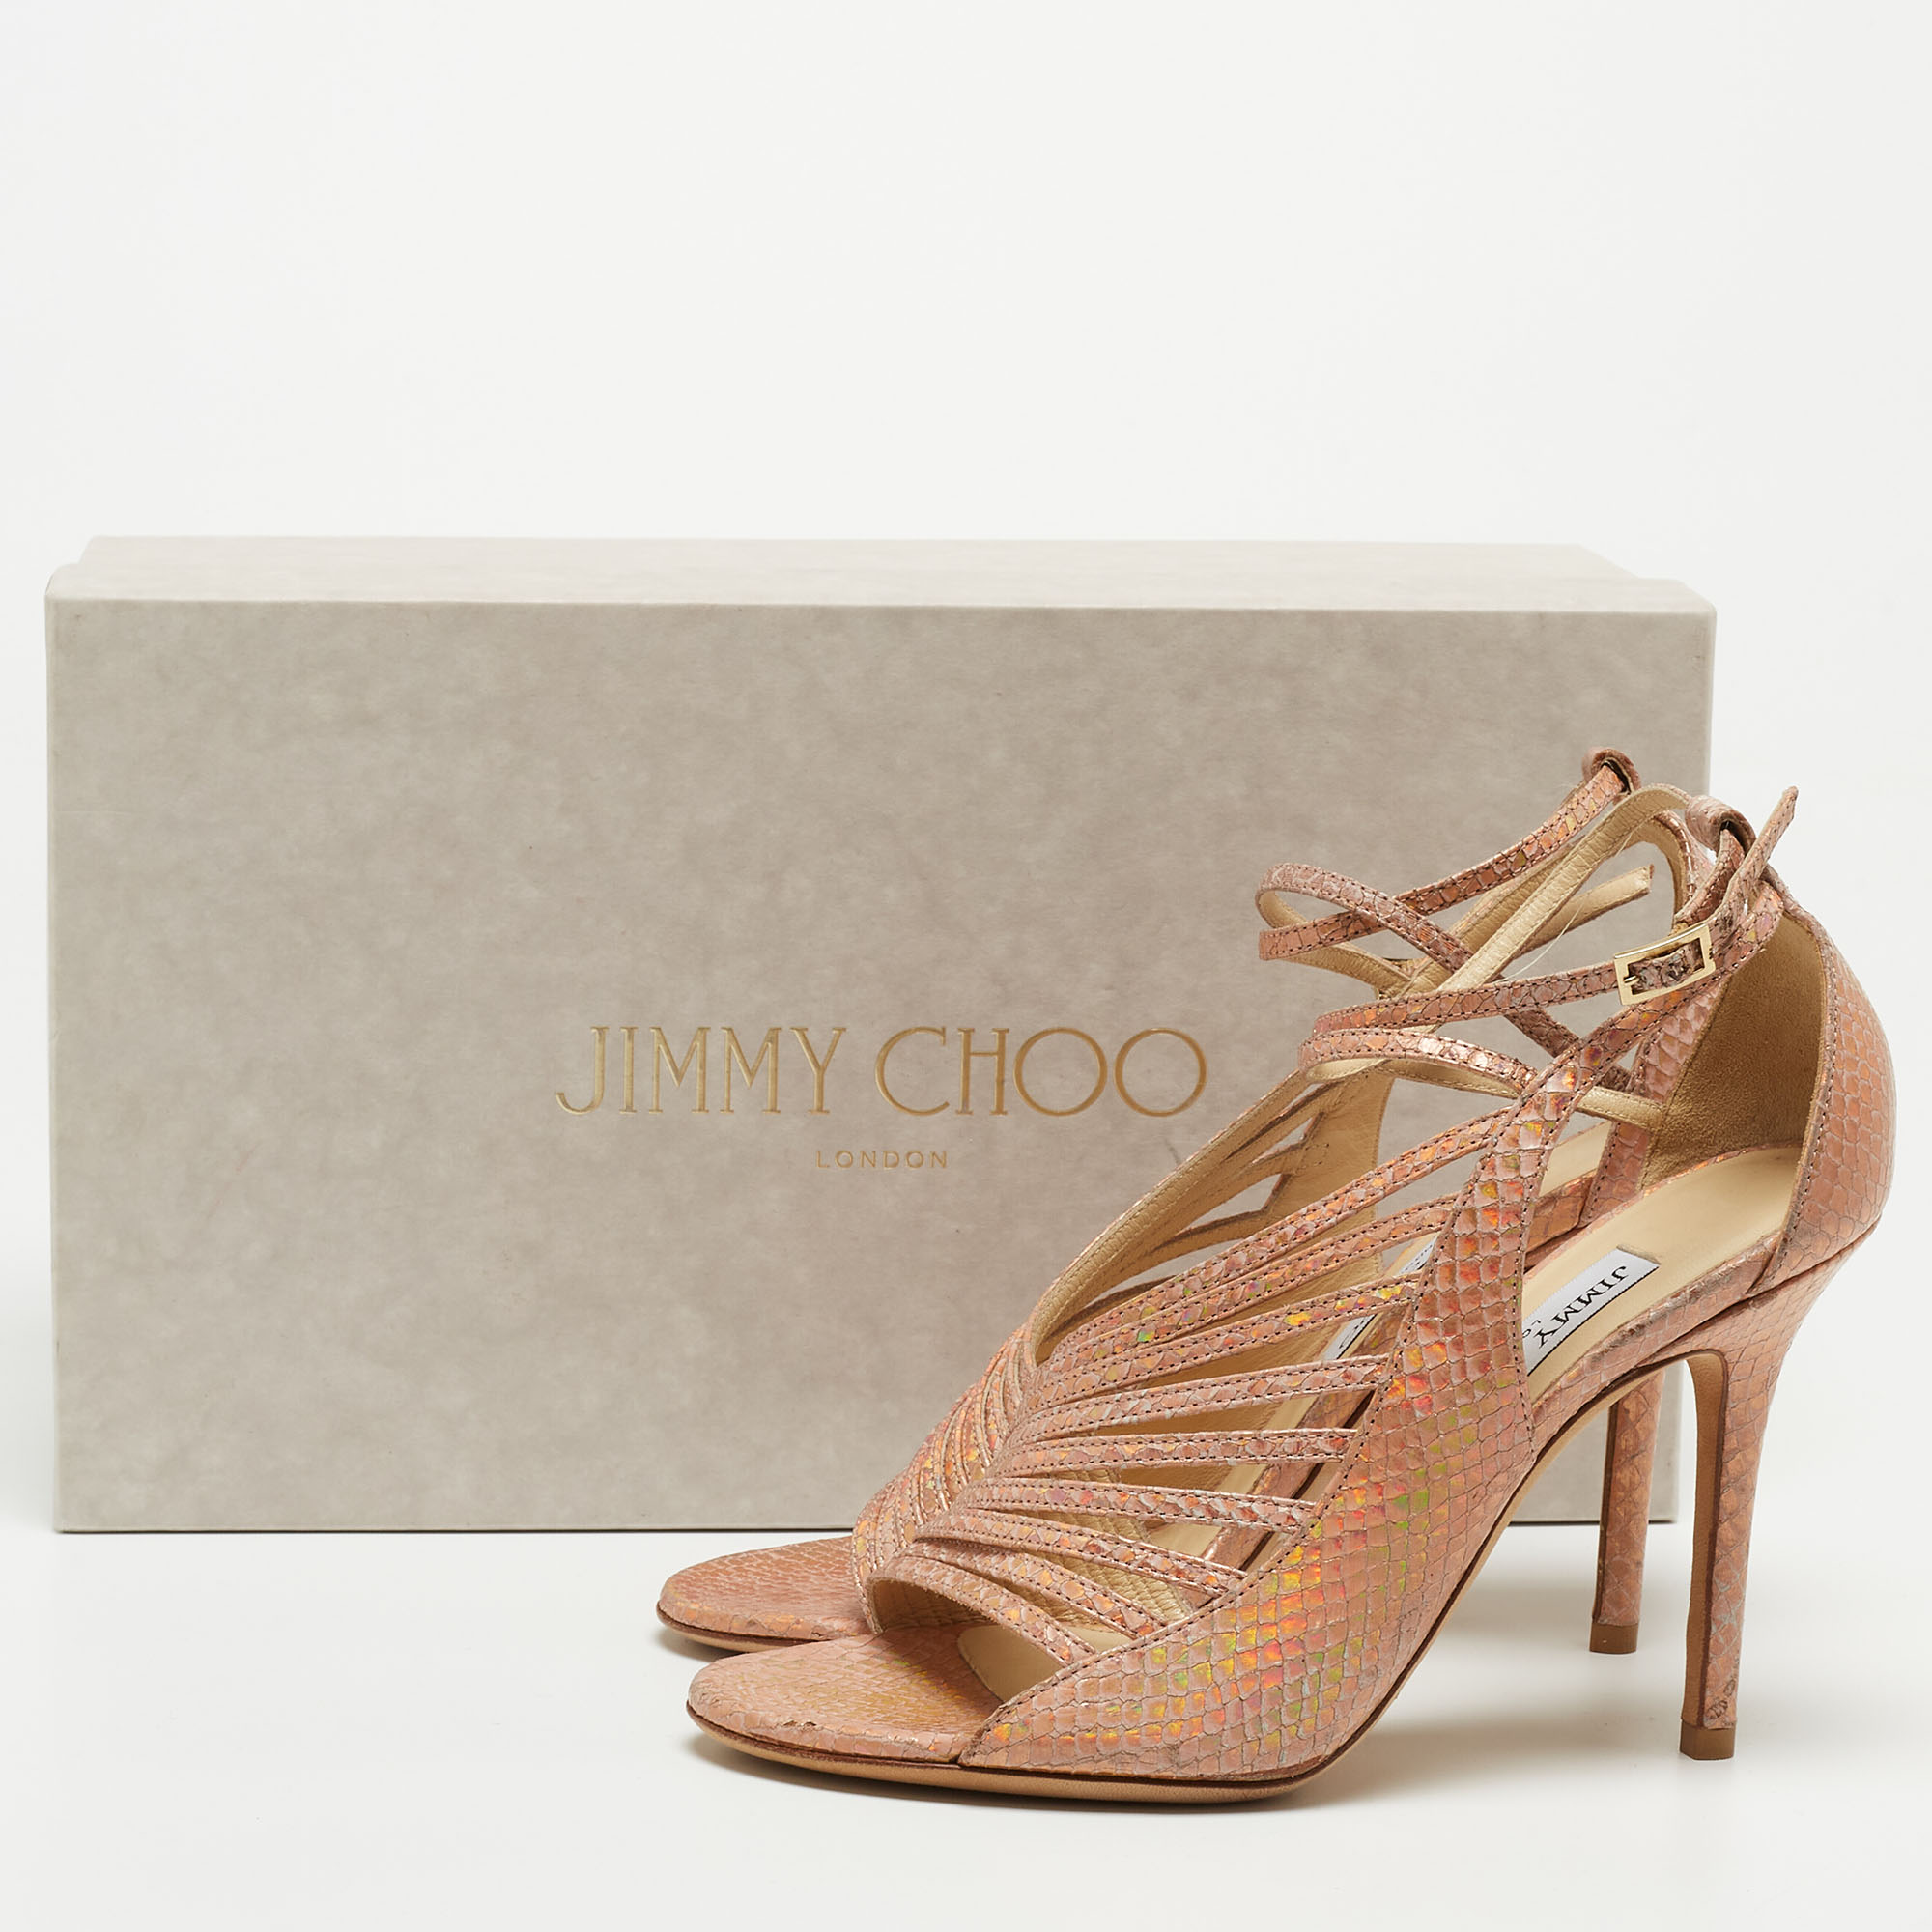 Jimmy Choo Metallic Pink Embossed Leather Strappy Open Toe Ankle Strap Sandals Size 36.5